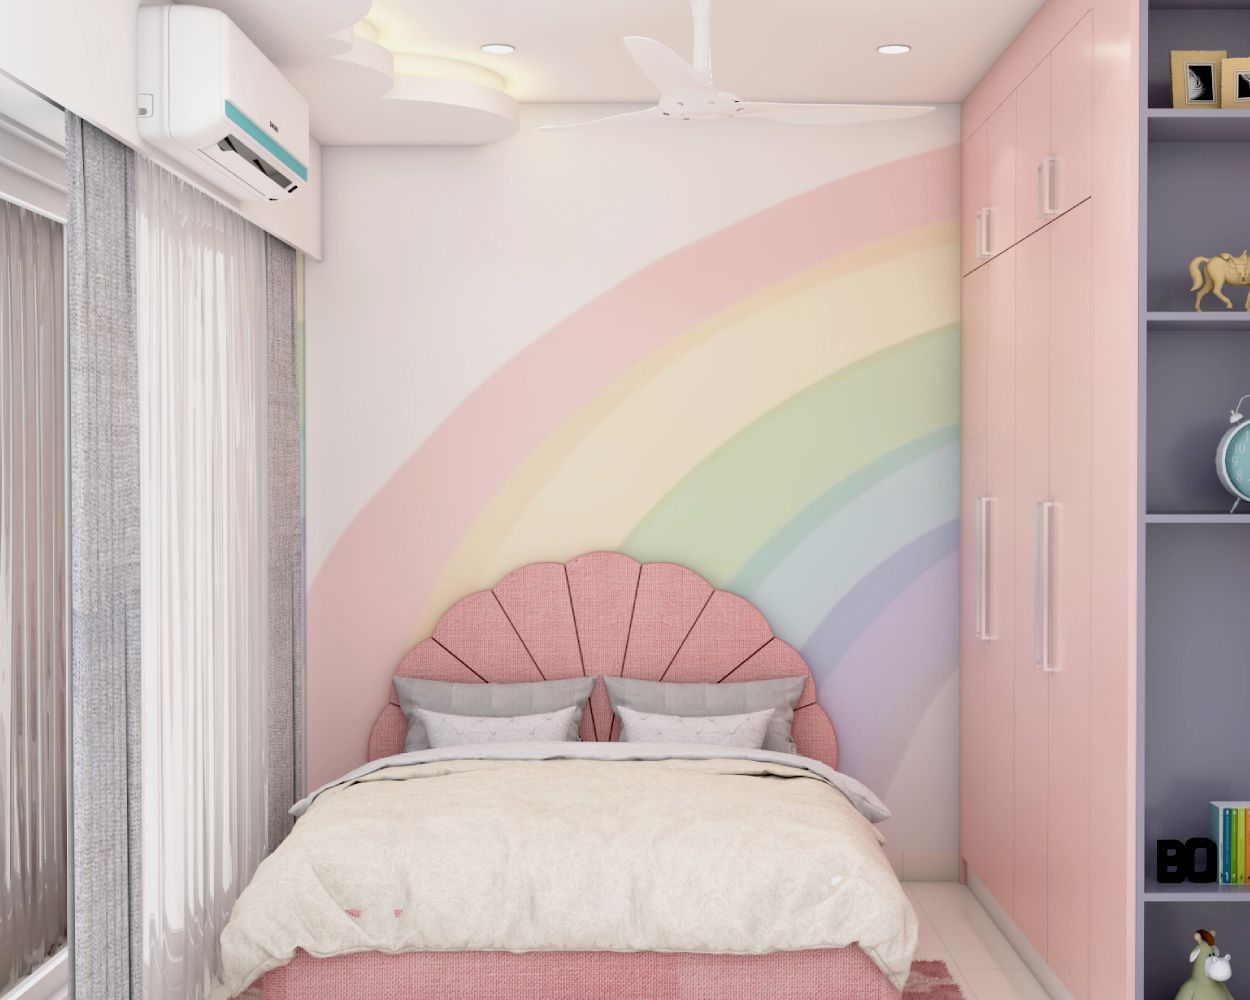 Modern Pink Kids Room Design For Girls With Shell-Shaped Headboard